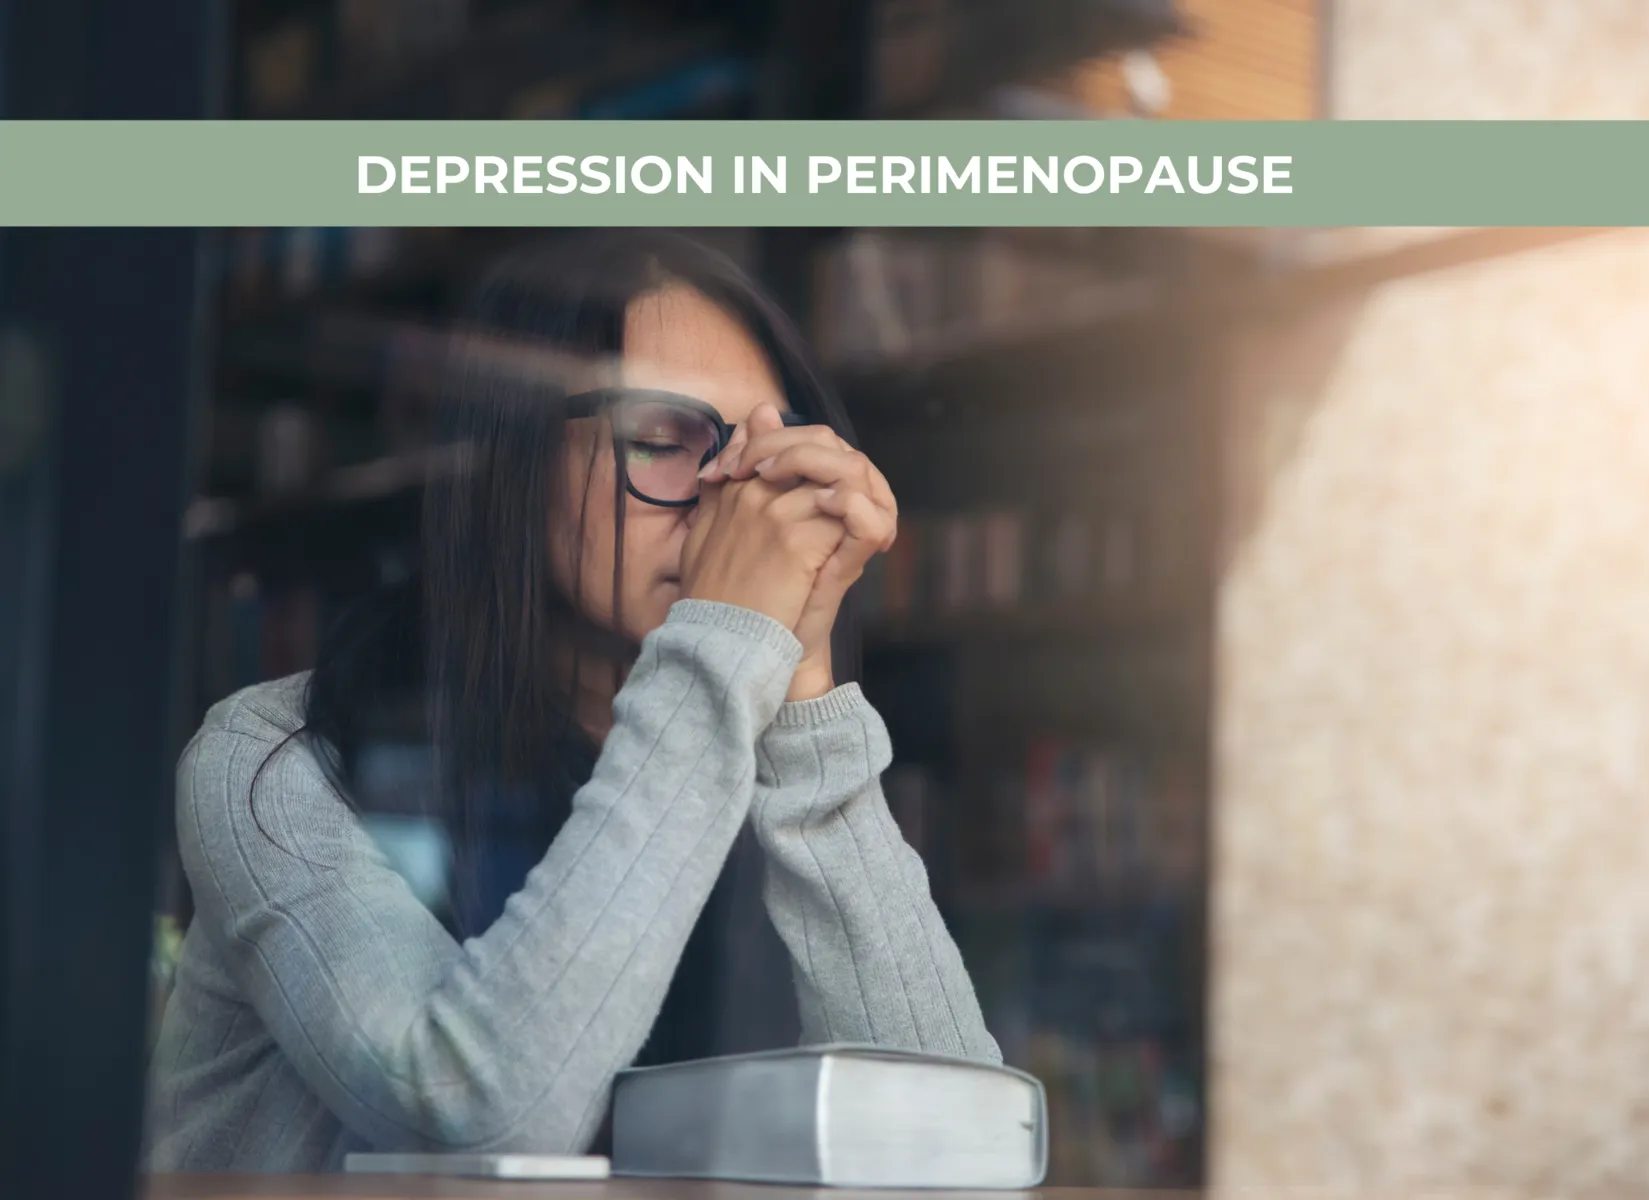 Frontiers  Estradiol Fluctuation, Sensitivity to Stress, and Depressive  Symptoms in the Menopause Transition: A Pilot Study